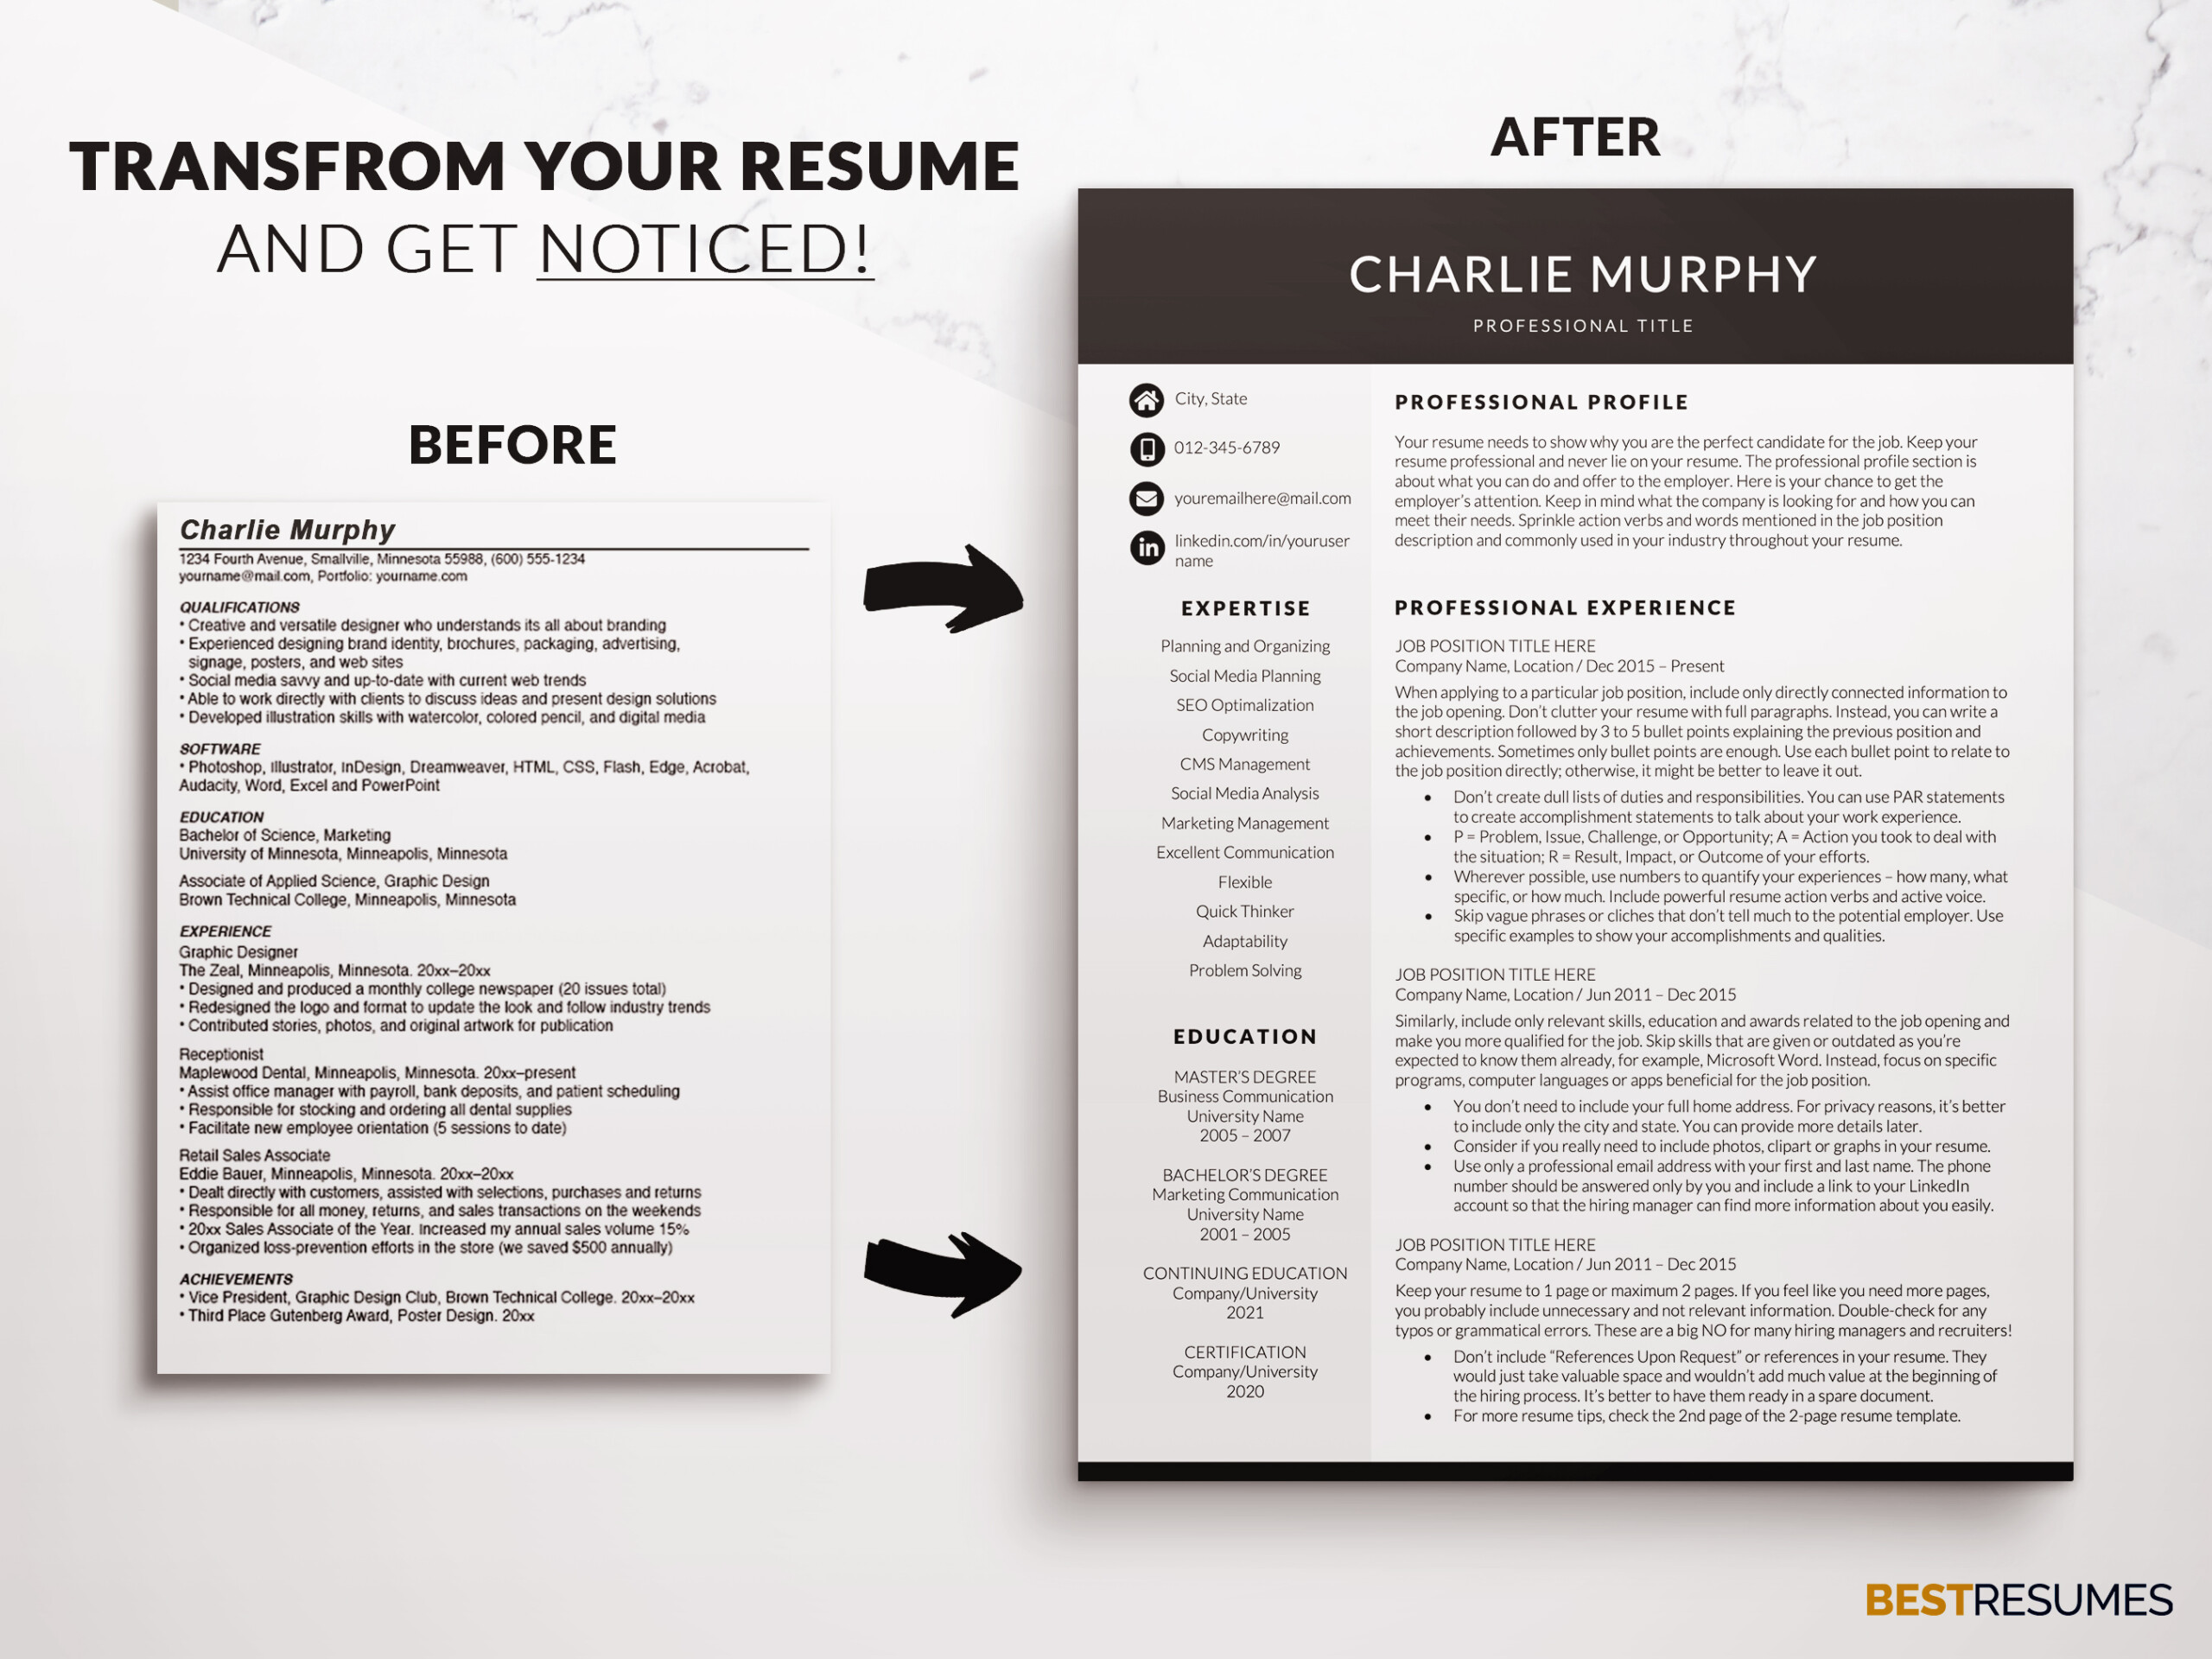 Business Resume Template Word Transform Resume Charlie Murphy scaled